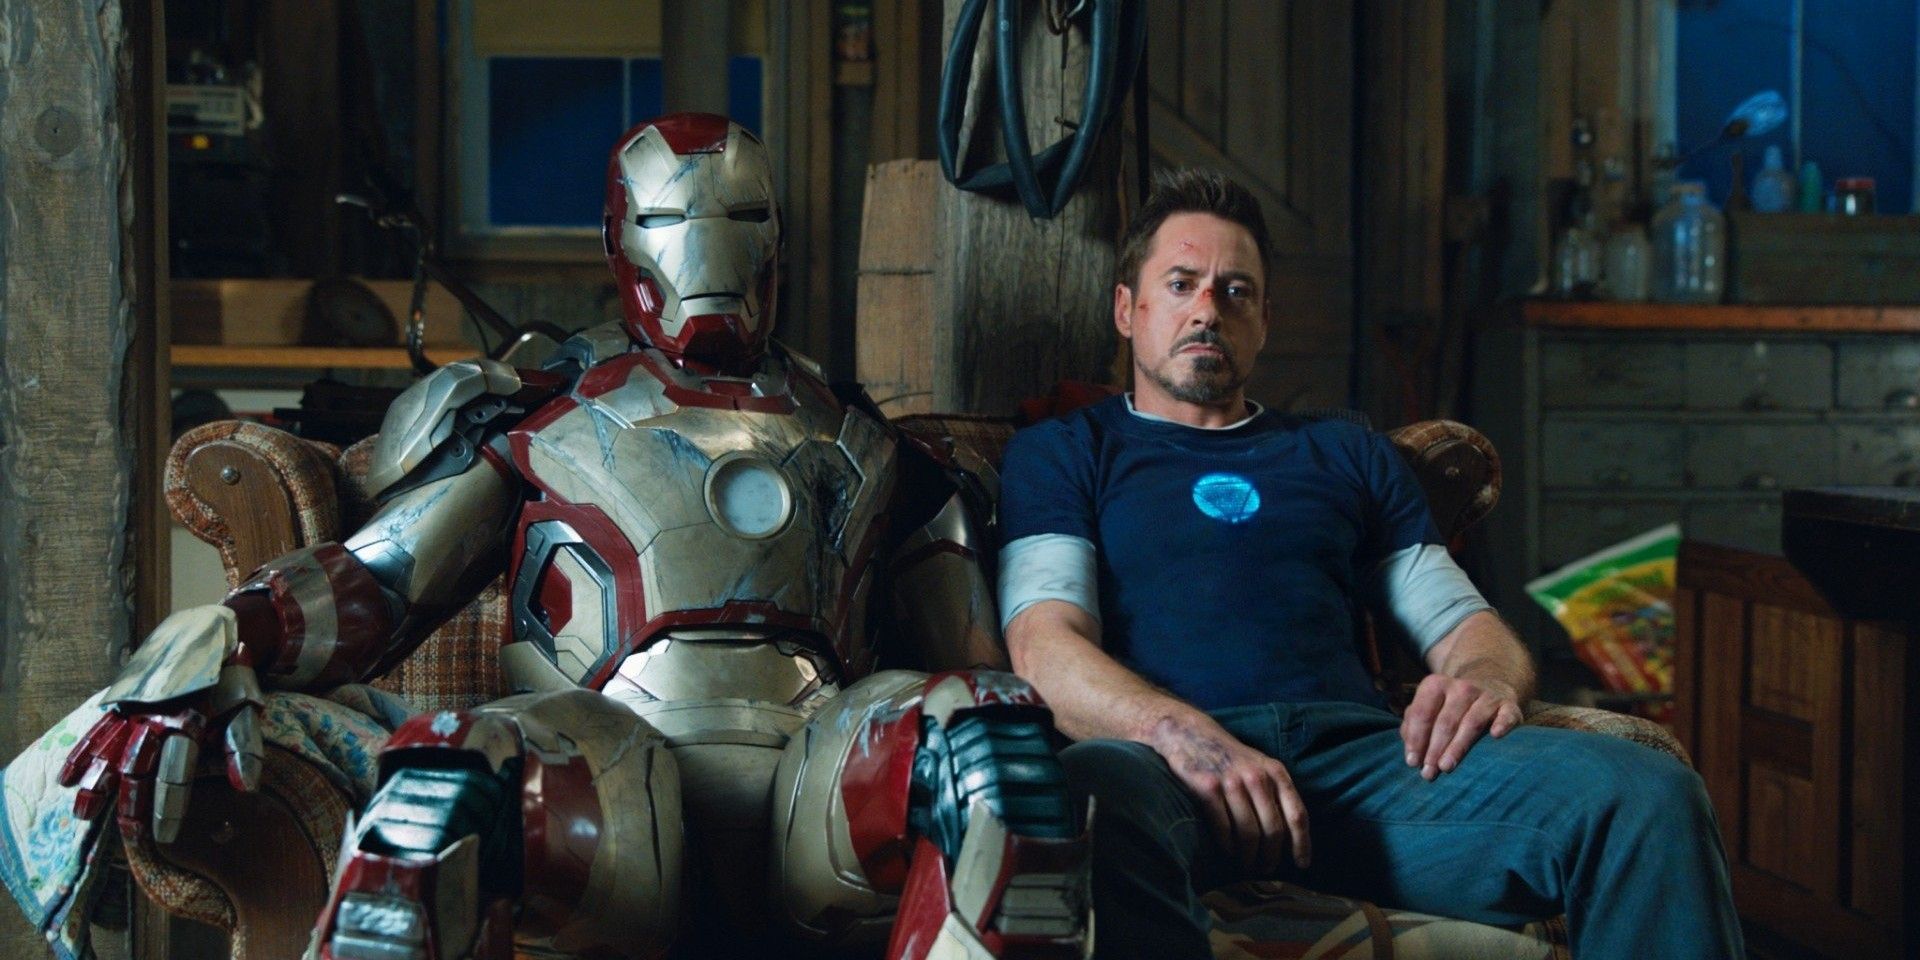 To satisfy your curiosity of what makes Iron Man so bad-ass in the recently released Captain America: Civil War, here’s 12 Powers You Didn’t Know Iron Man Had.